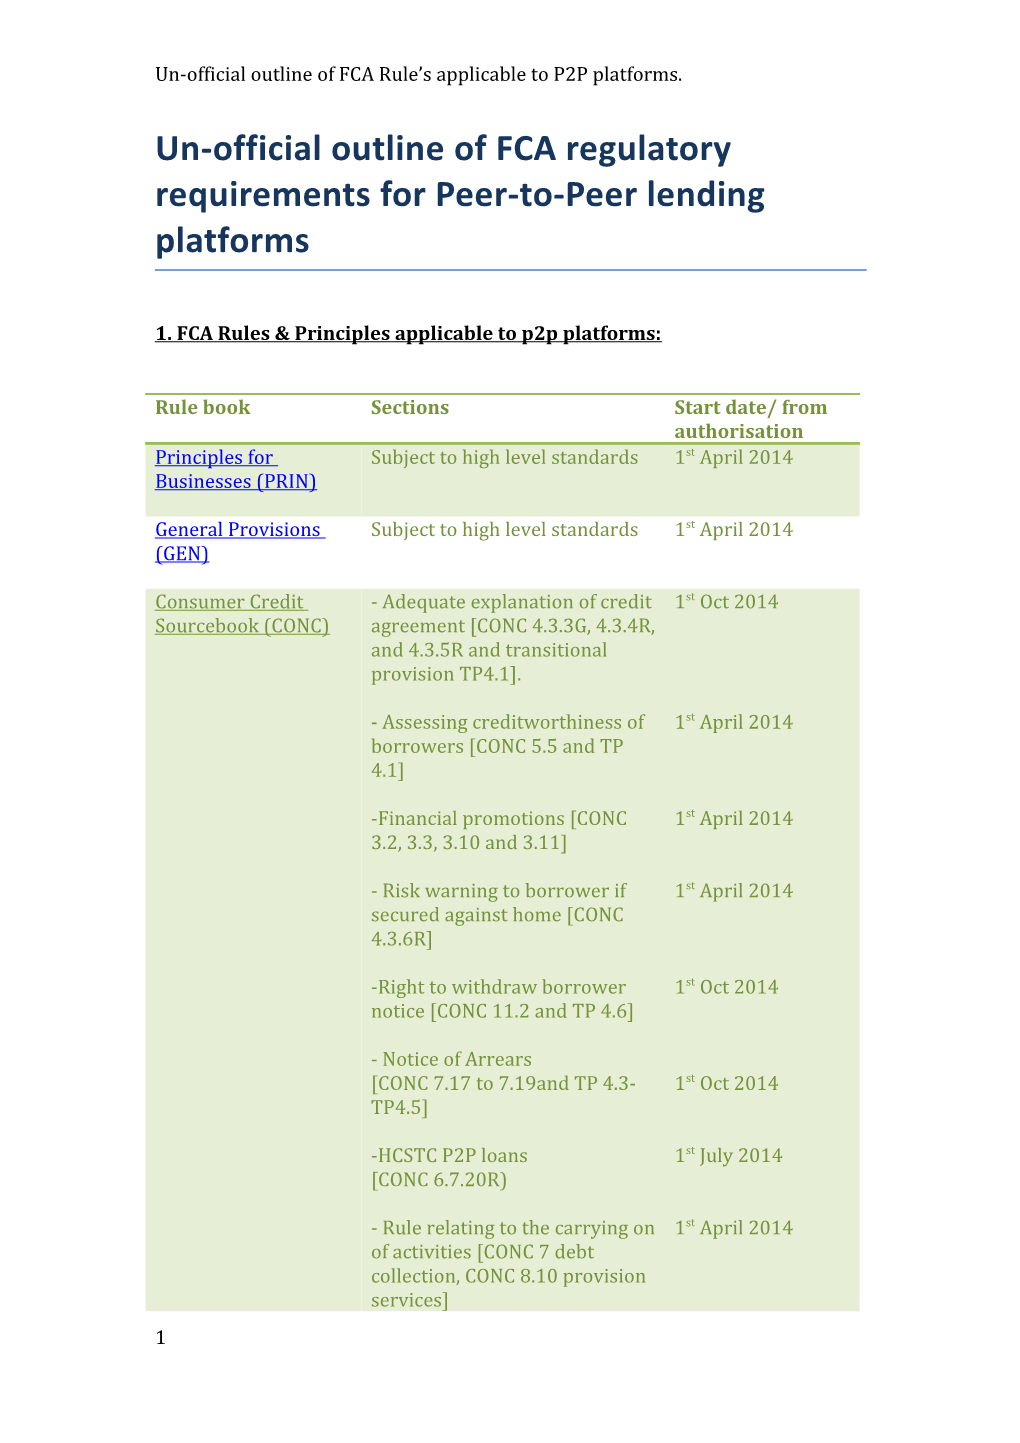 1. FCA Rules & Principles Applicable to P2p Platforms